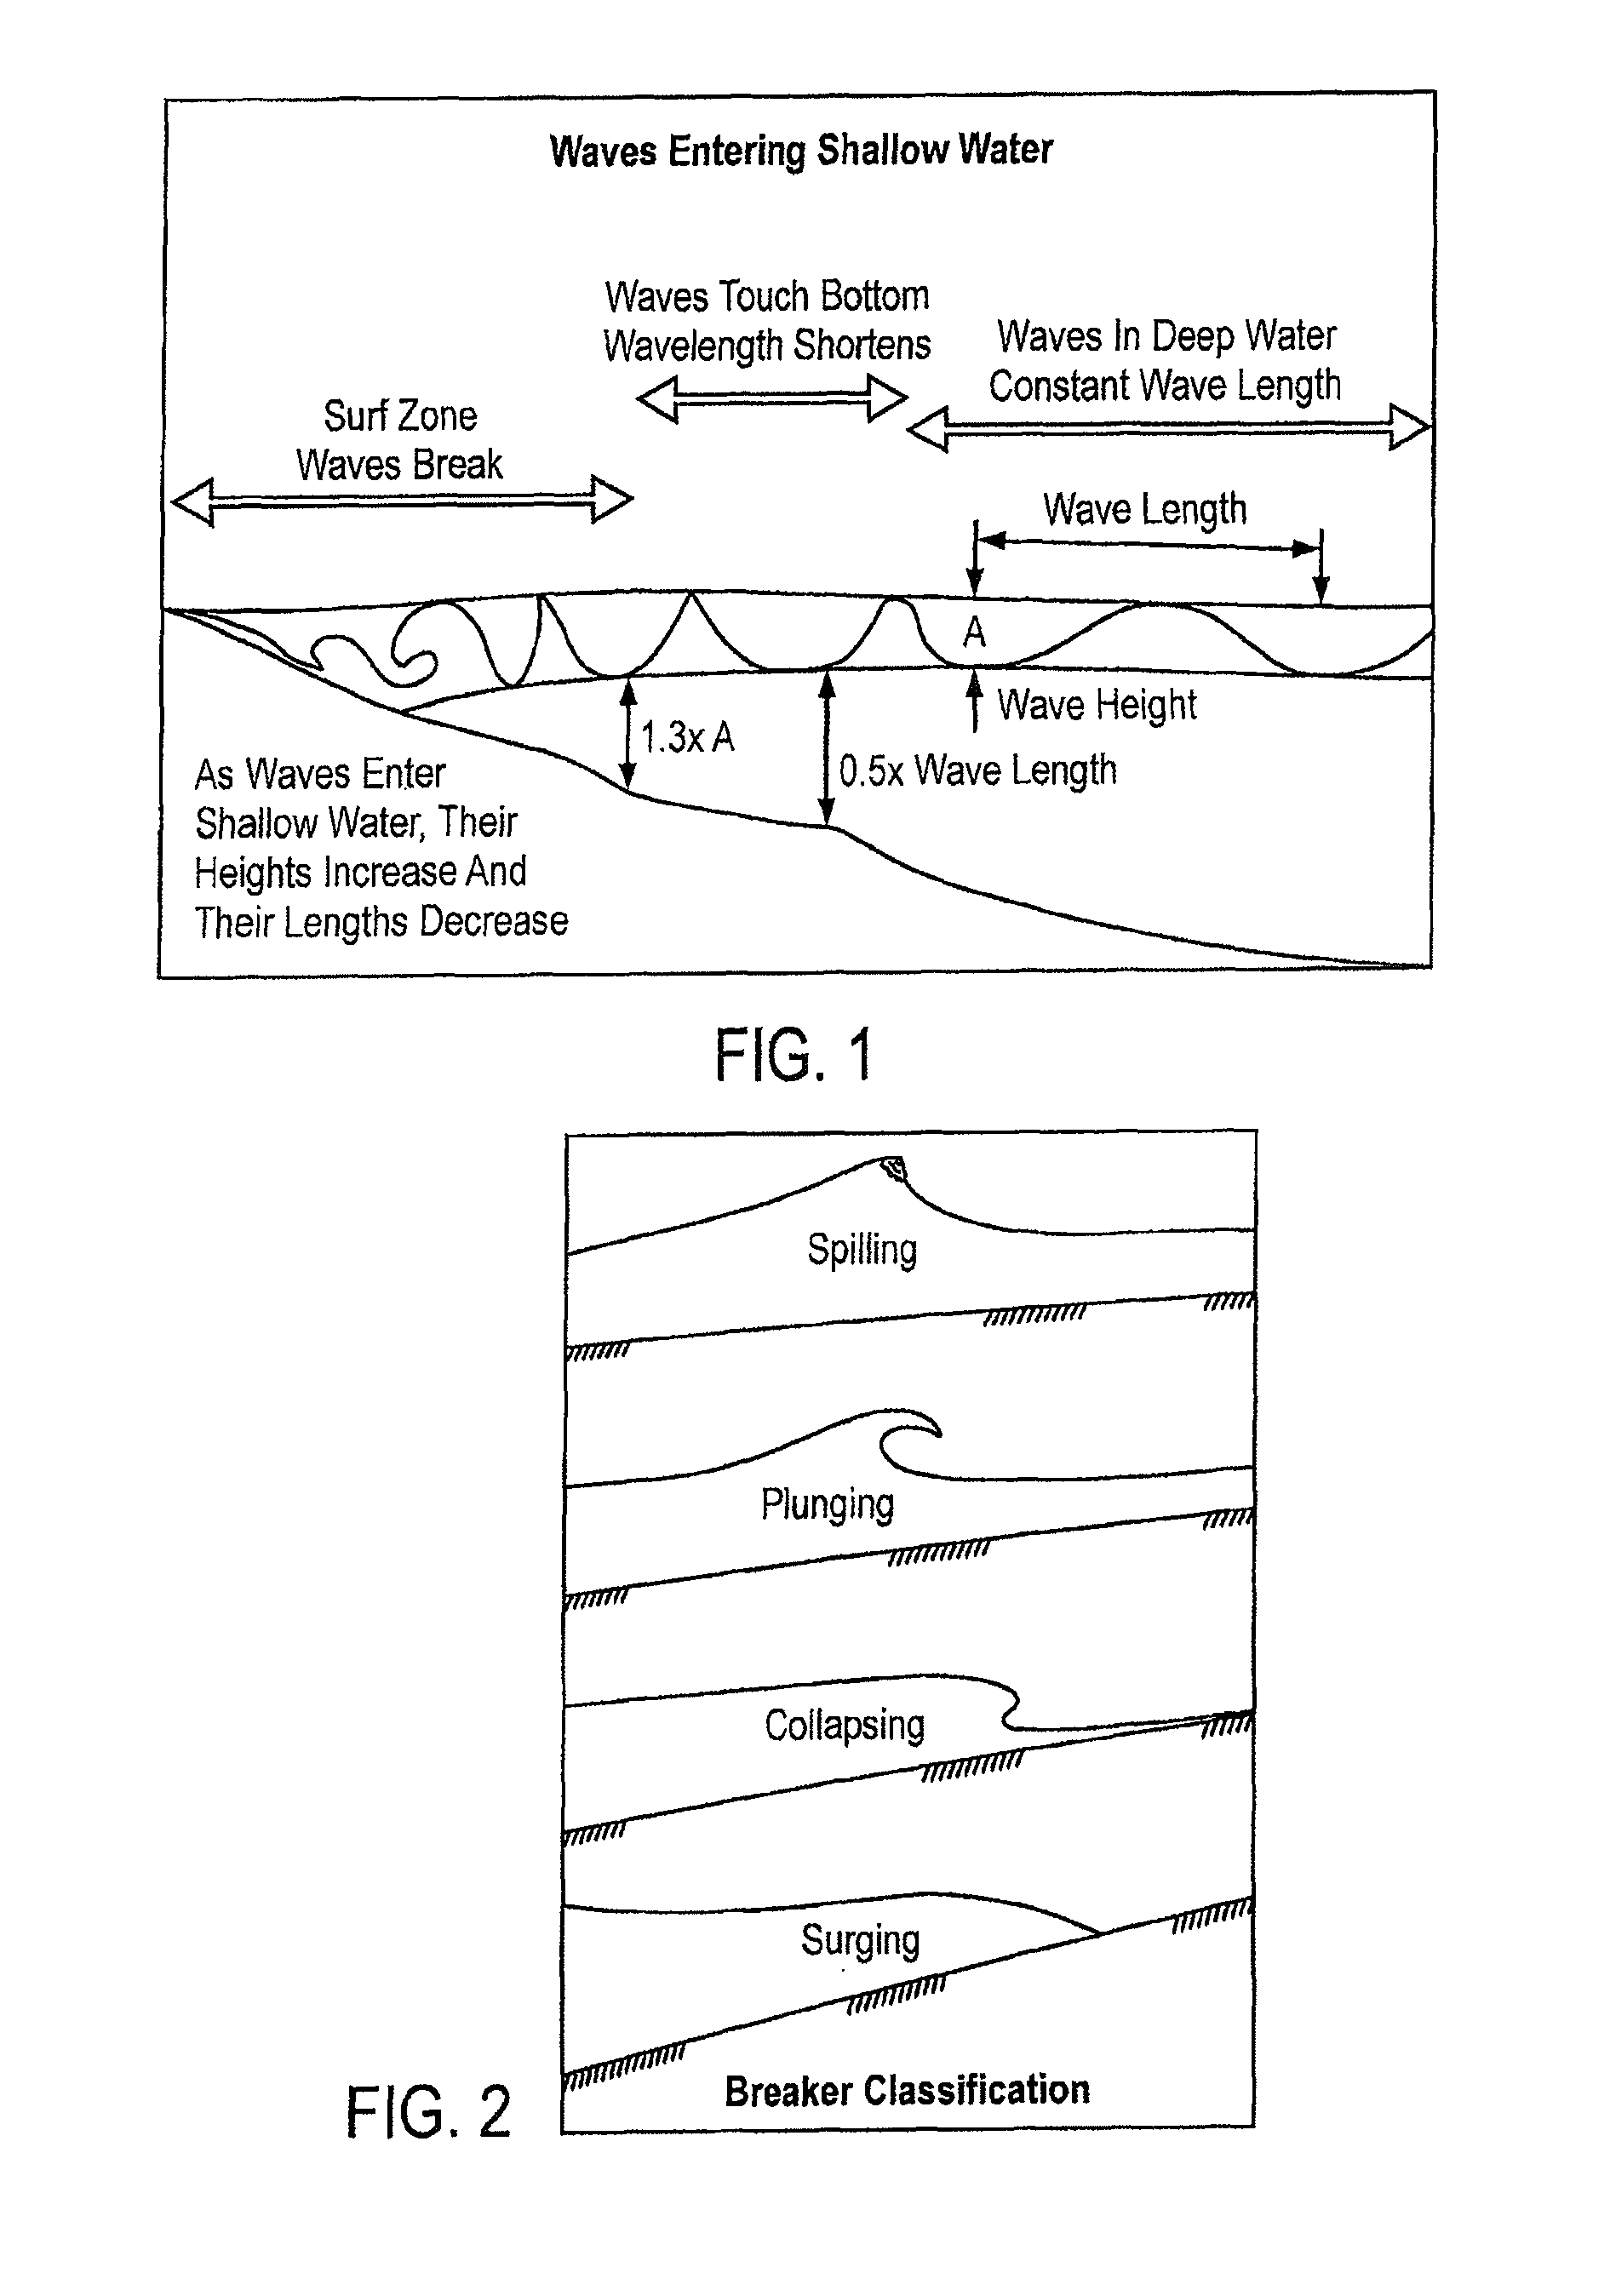 Surface gravity wave generator and wave pool